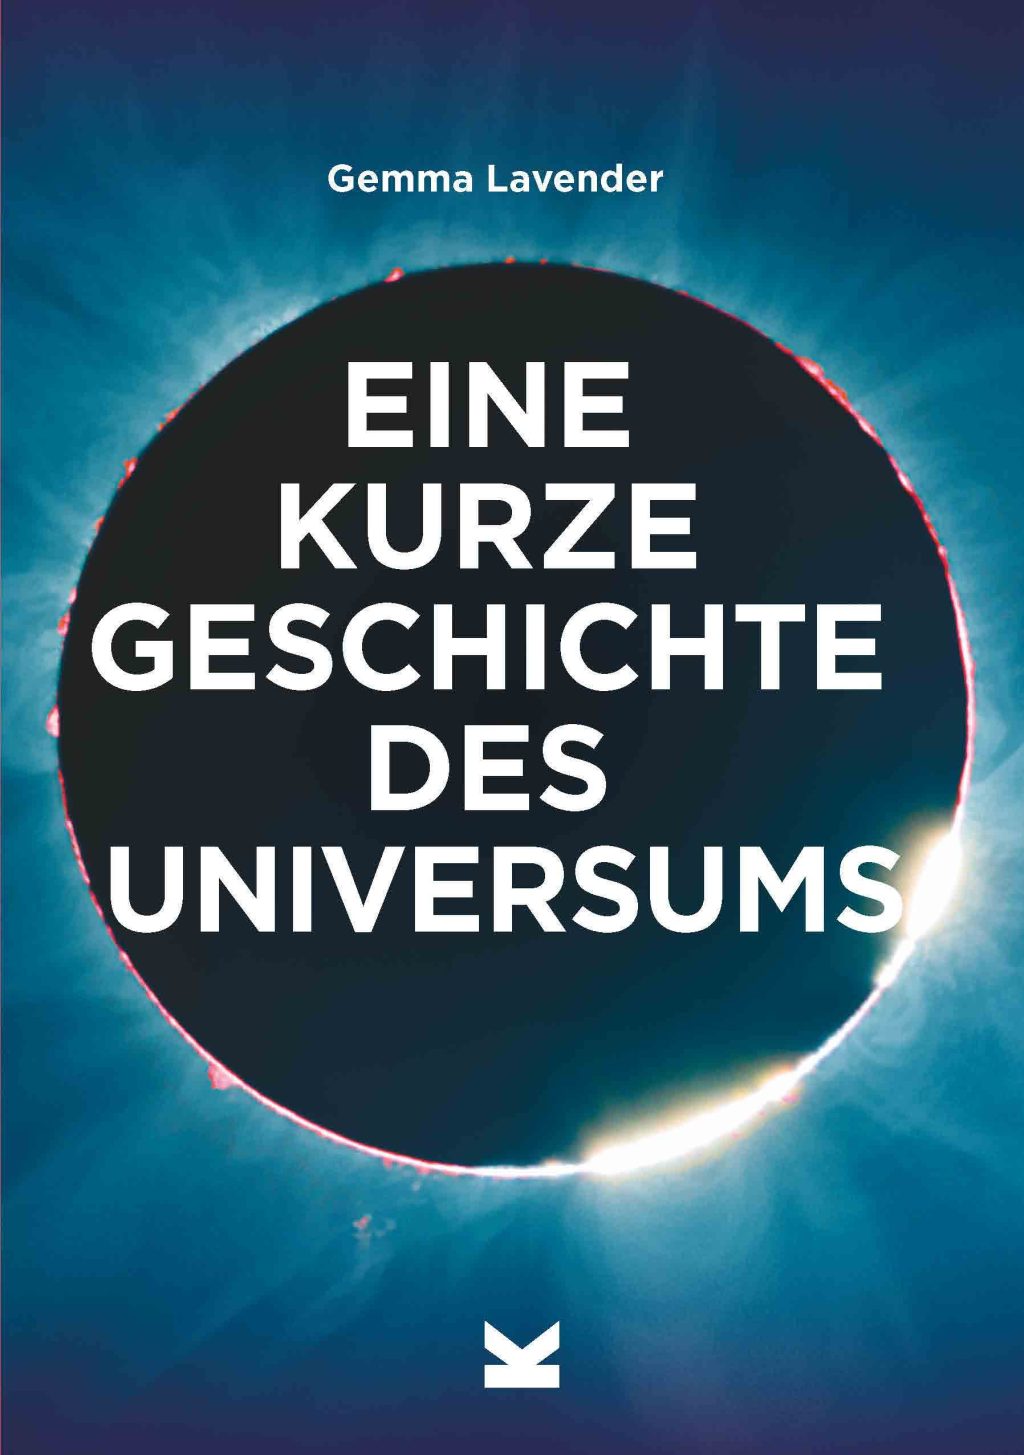 Review of a book entitled "A Brief History of the Universe"